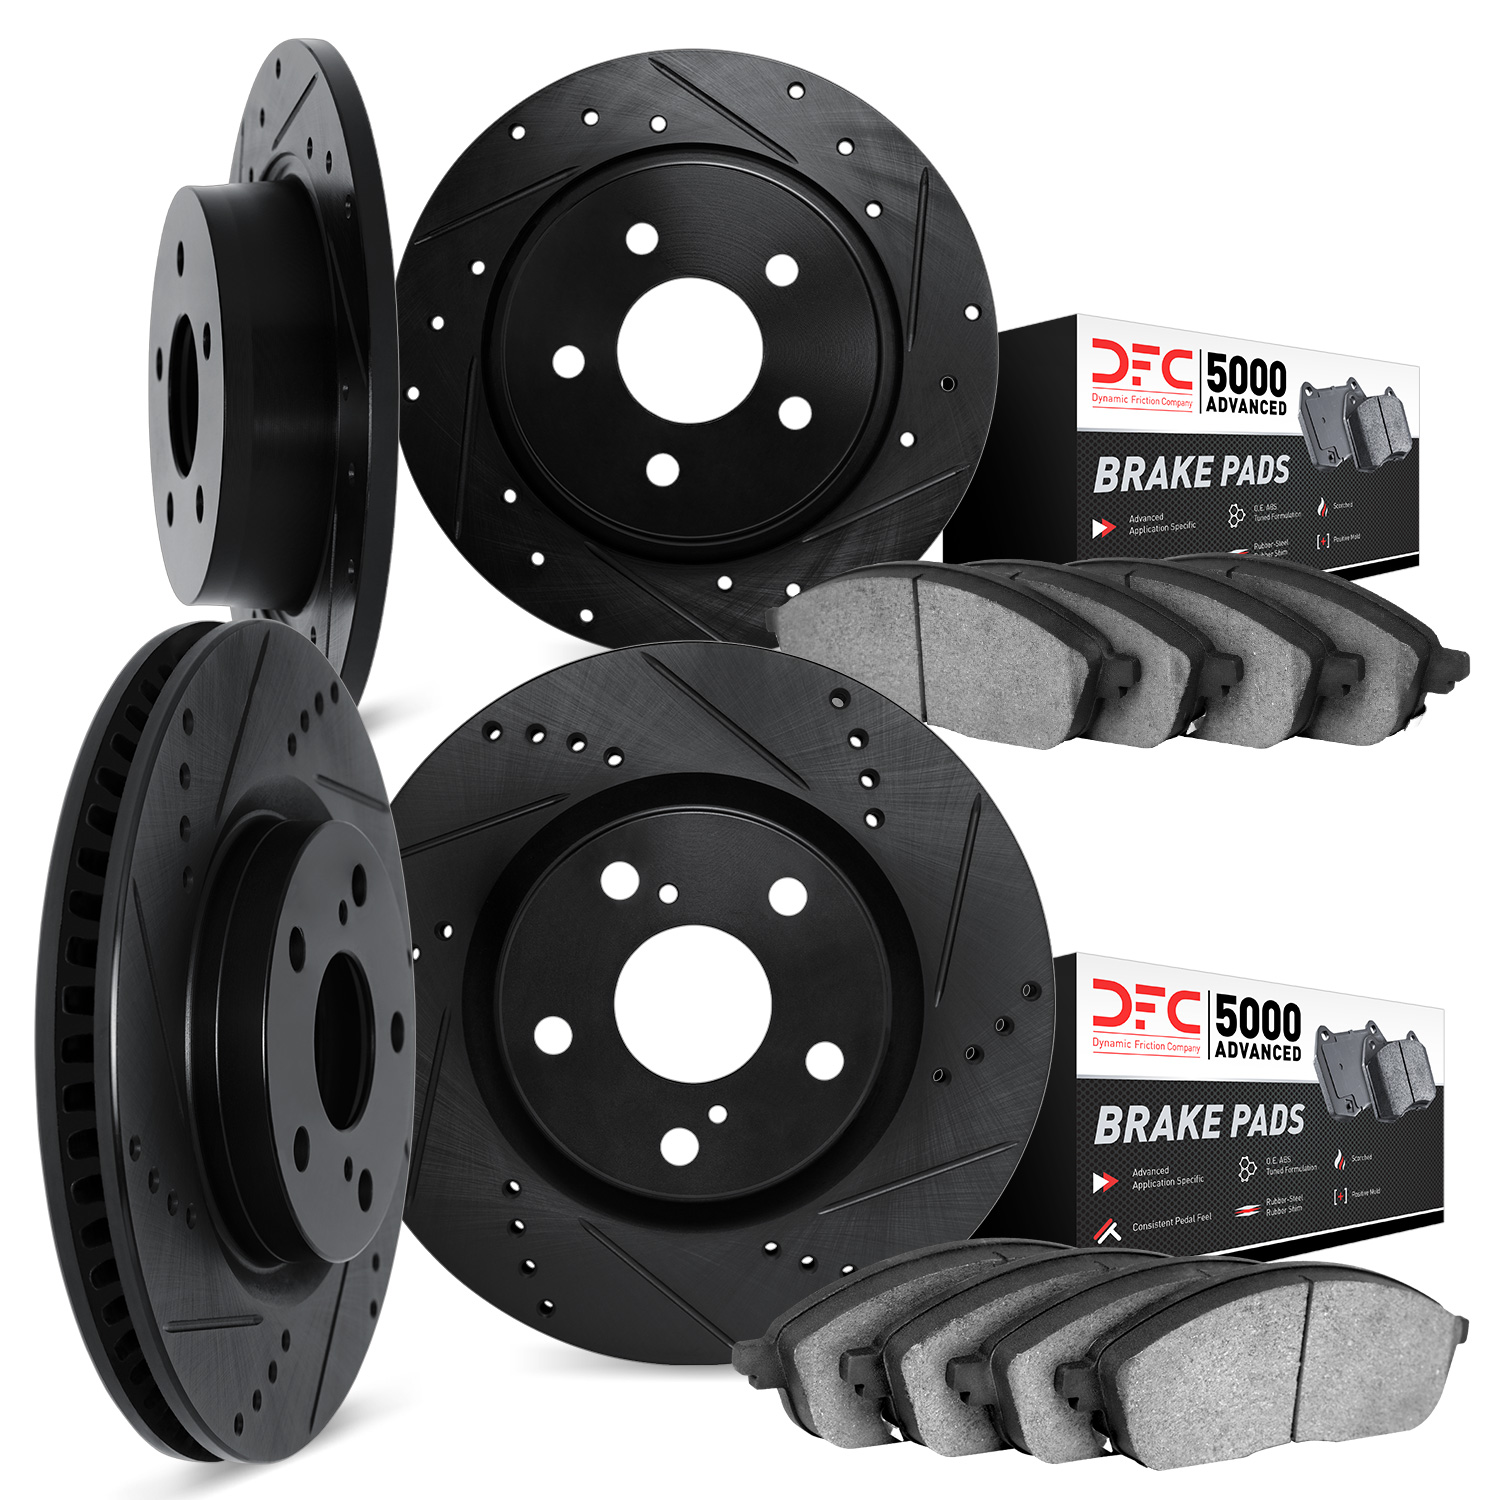 8504-76139 Drilled/Slotted Brake Rotors w/5000 Advanced Brake Pads Kit [Black], 2004-2004 Lexus/Toyota/Scion, Position: Front an